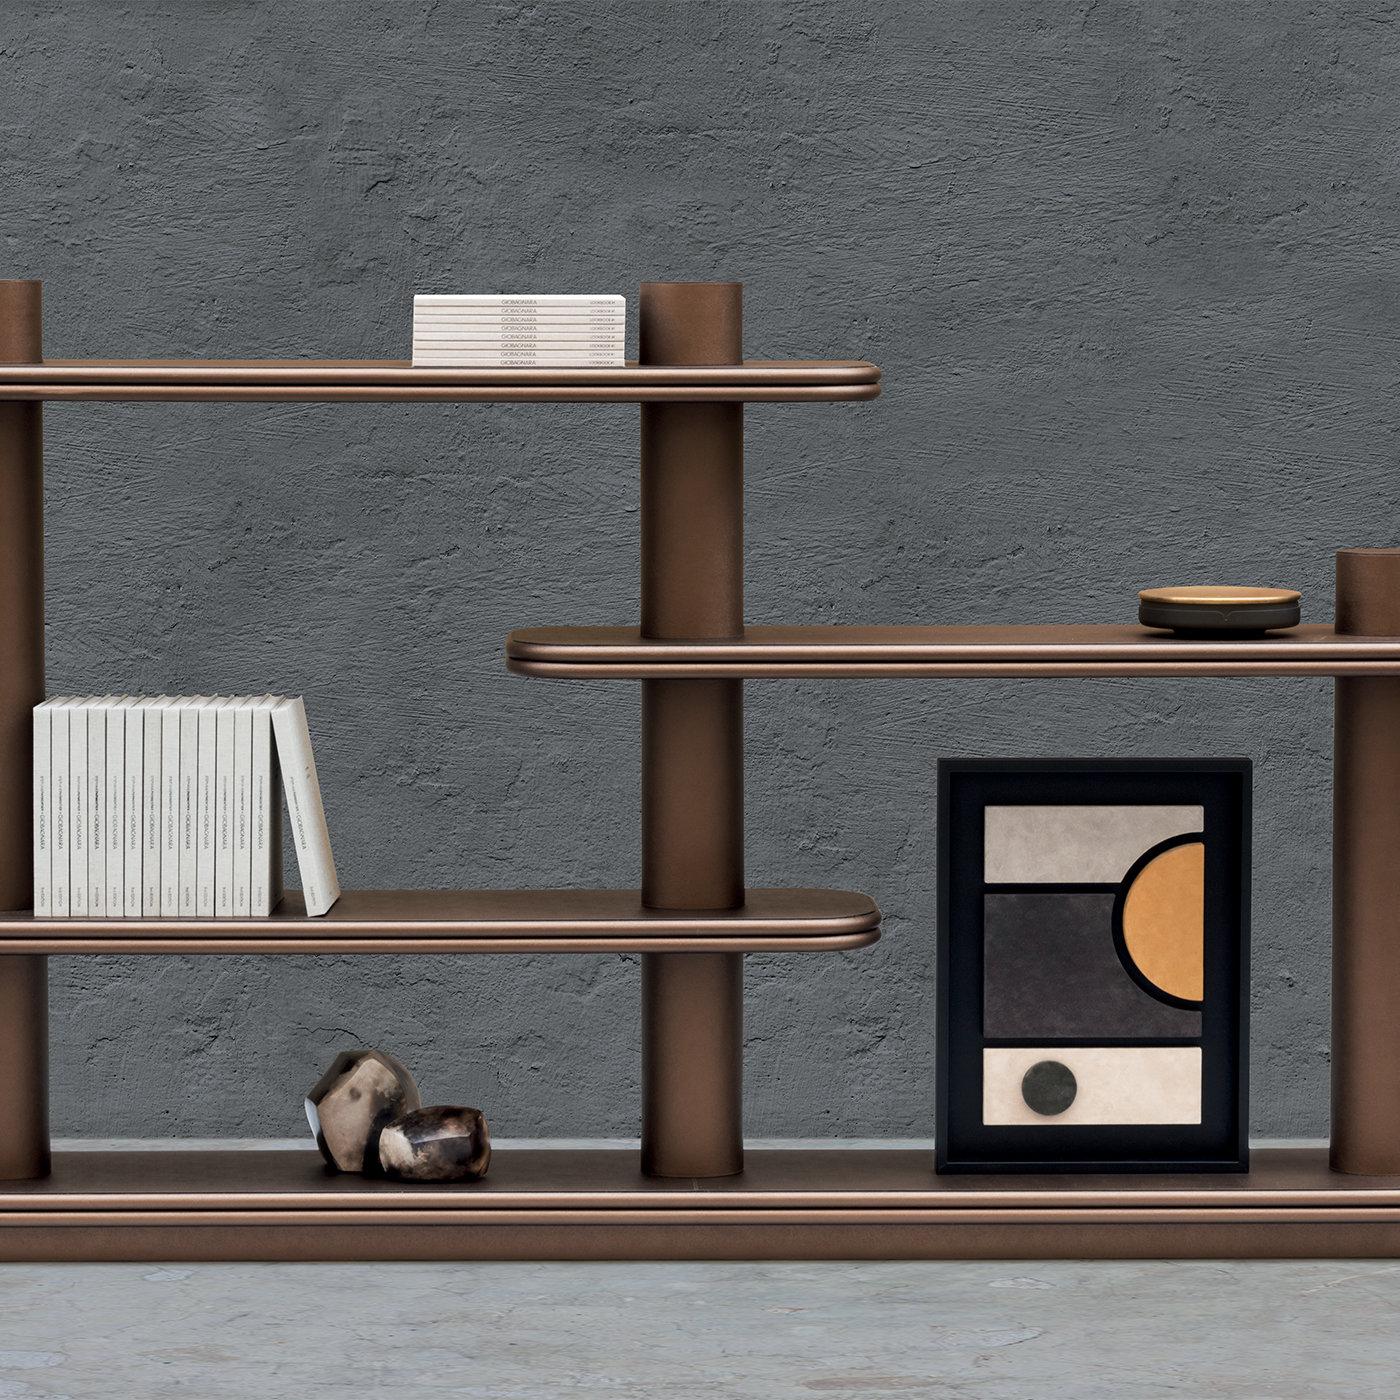 Double bookcase by Stephane Parmentier for Giobagnara. 
The object presented in the image has following finish: F82 Rust Nappa Leather

Entirely wrapped in soft brown nappa leather, this sophisticated bookcase is an exercise in balanced volumes